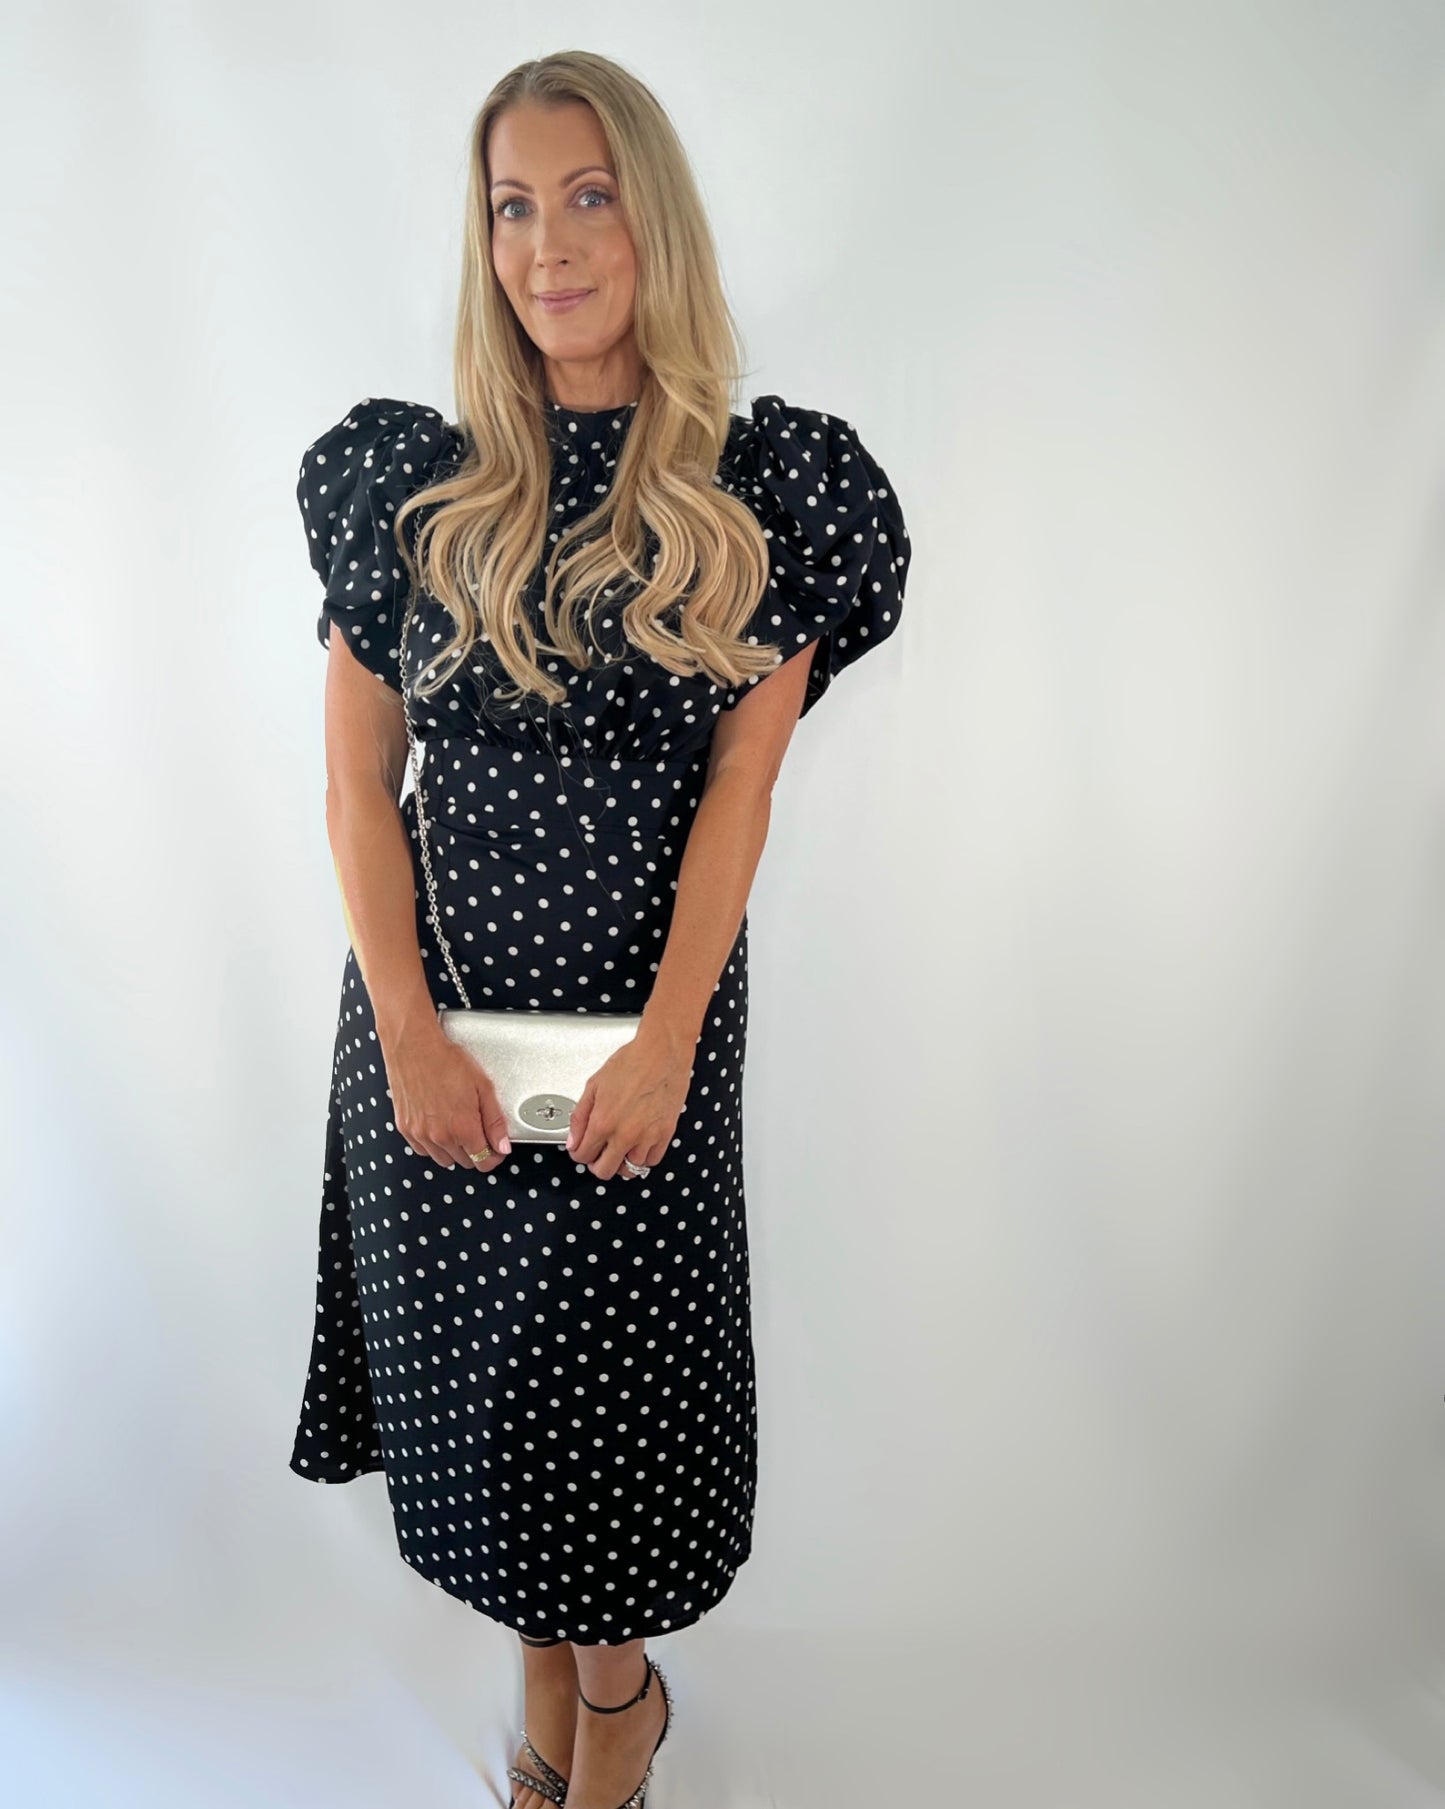 Polka Dot Midi Dress in Black with Cut Out Back